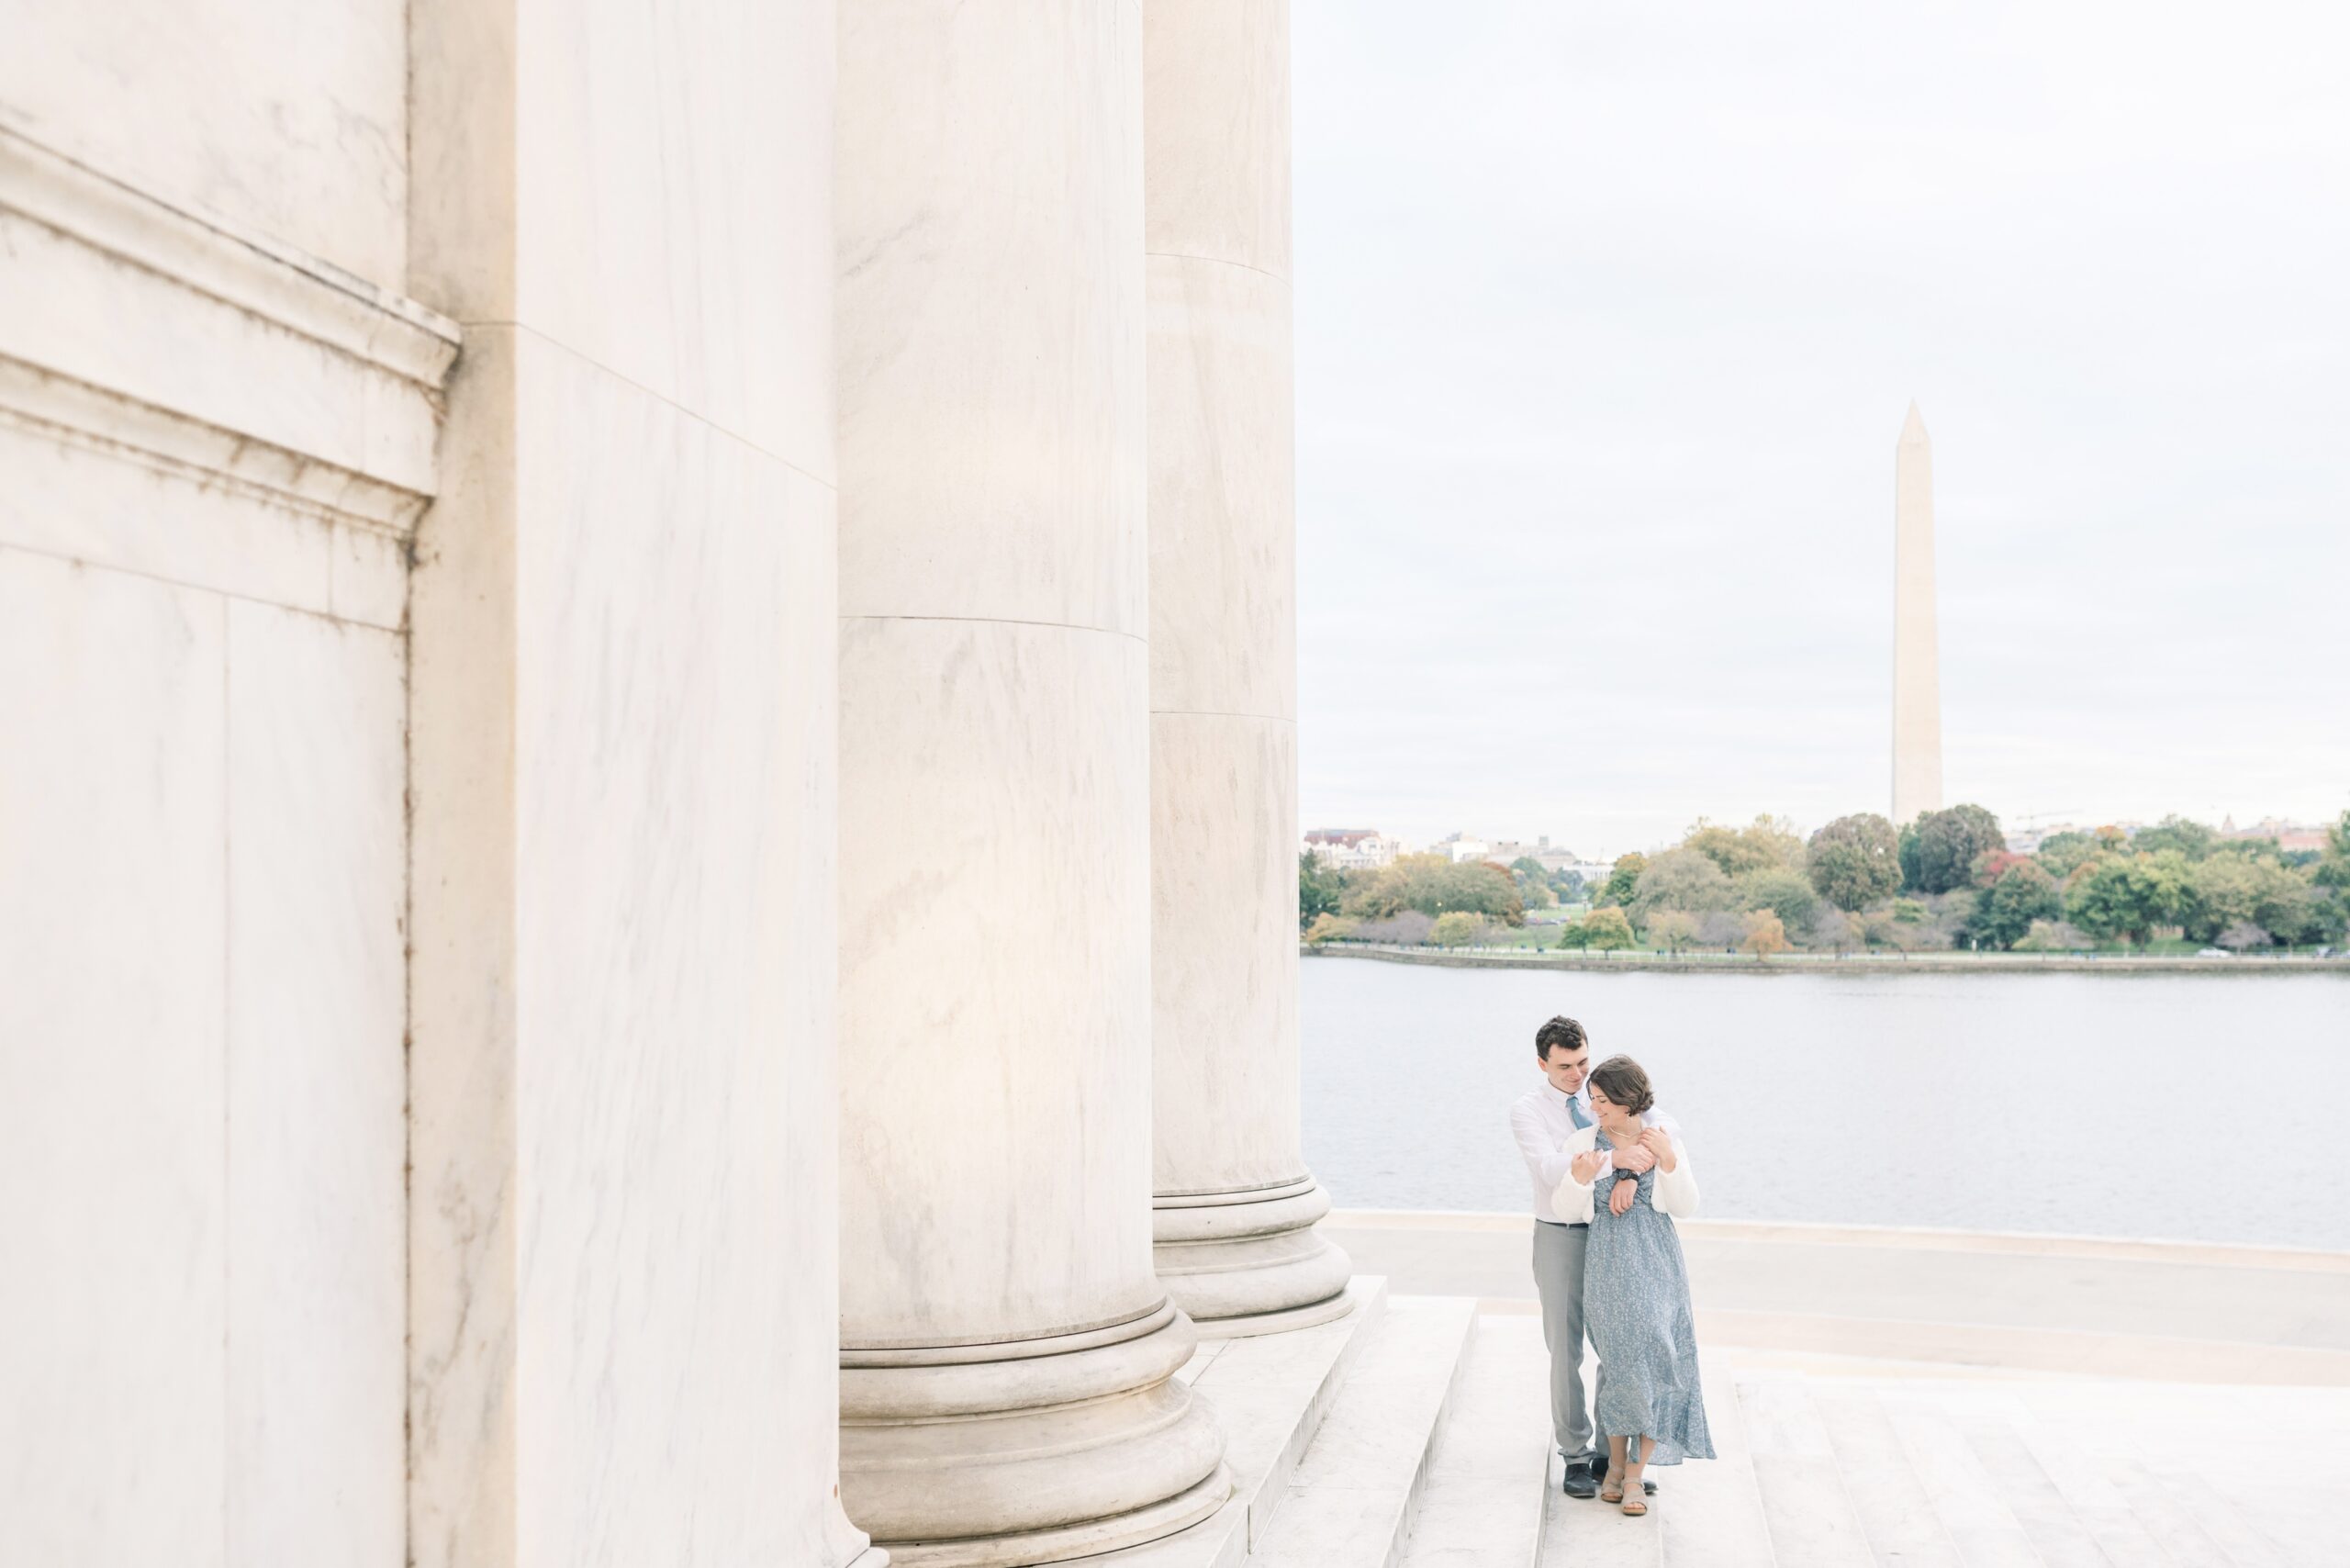 Fall engagement photos captured at the Jefferson Memorial in Washington, DC.